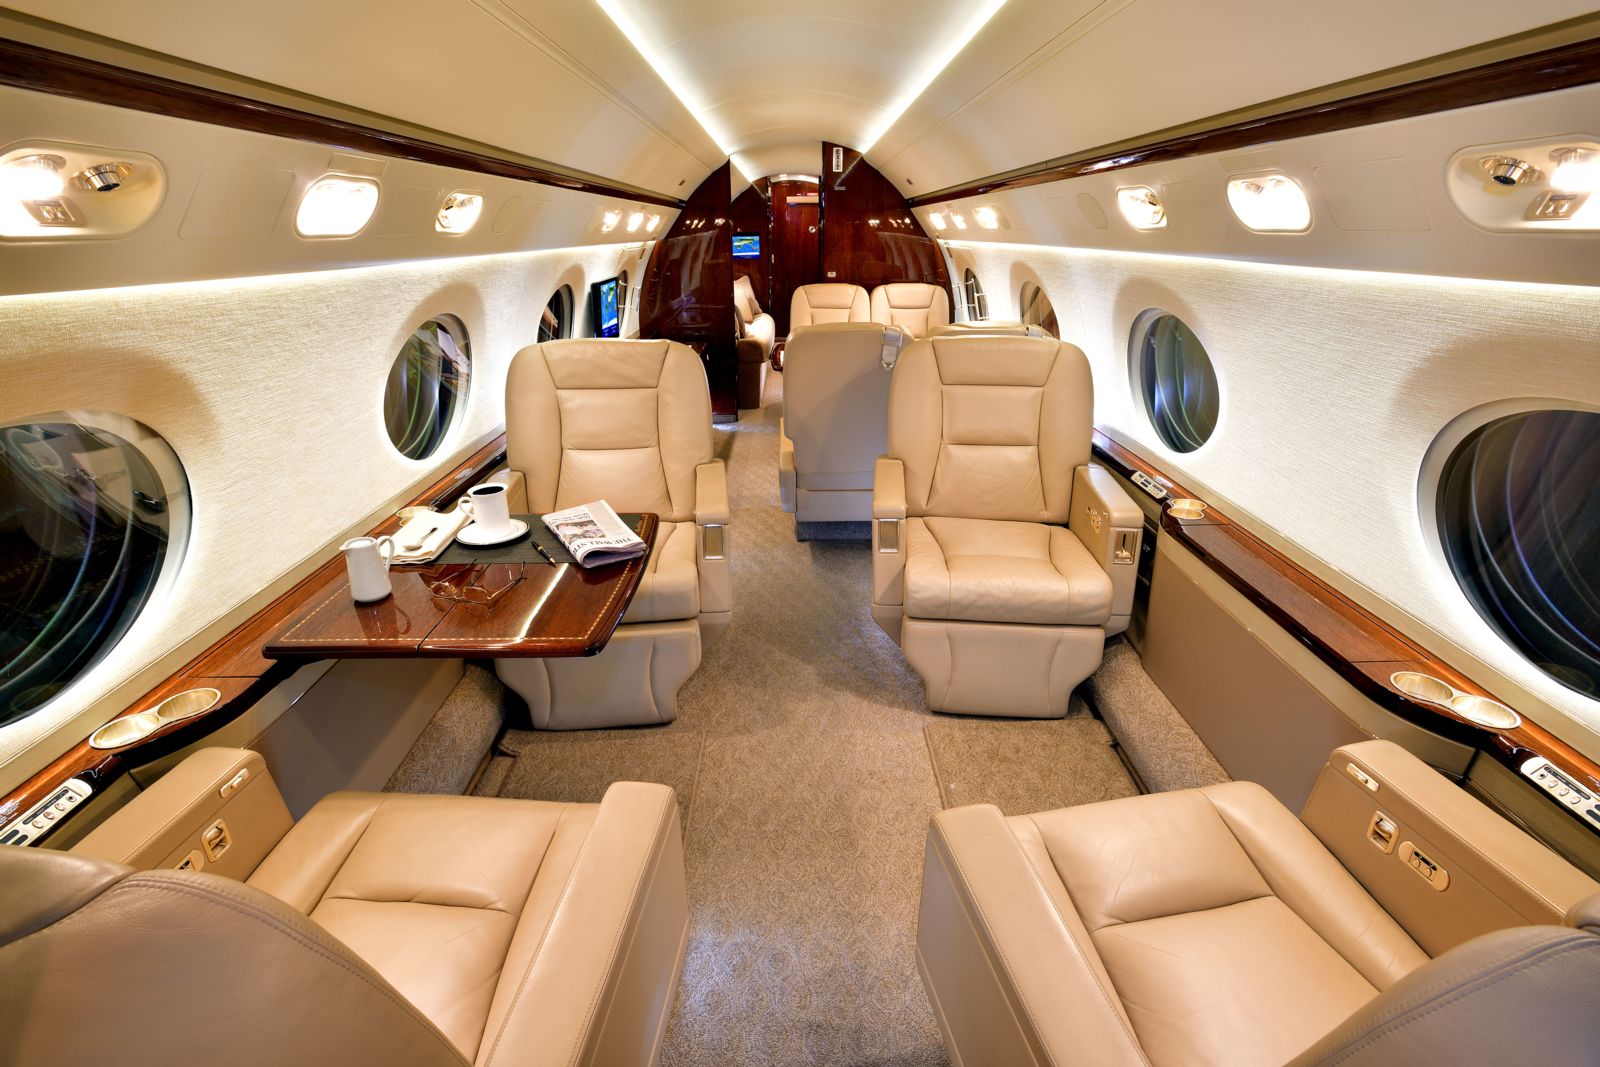 Gulfstream G550  S/N 5375 for sale | gallery image: /userfiles/files/int1e_300.jpg